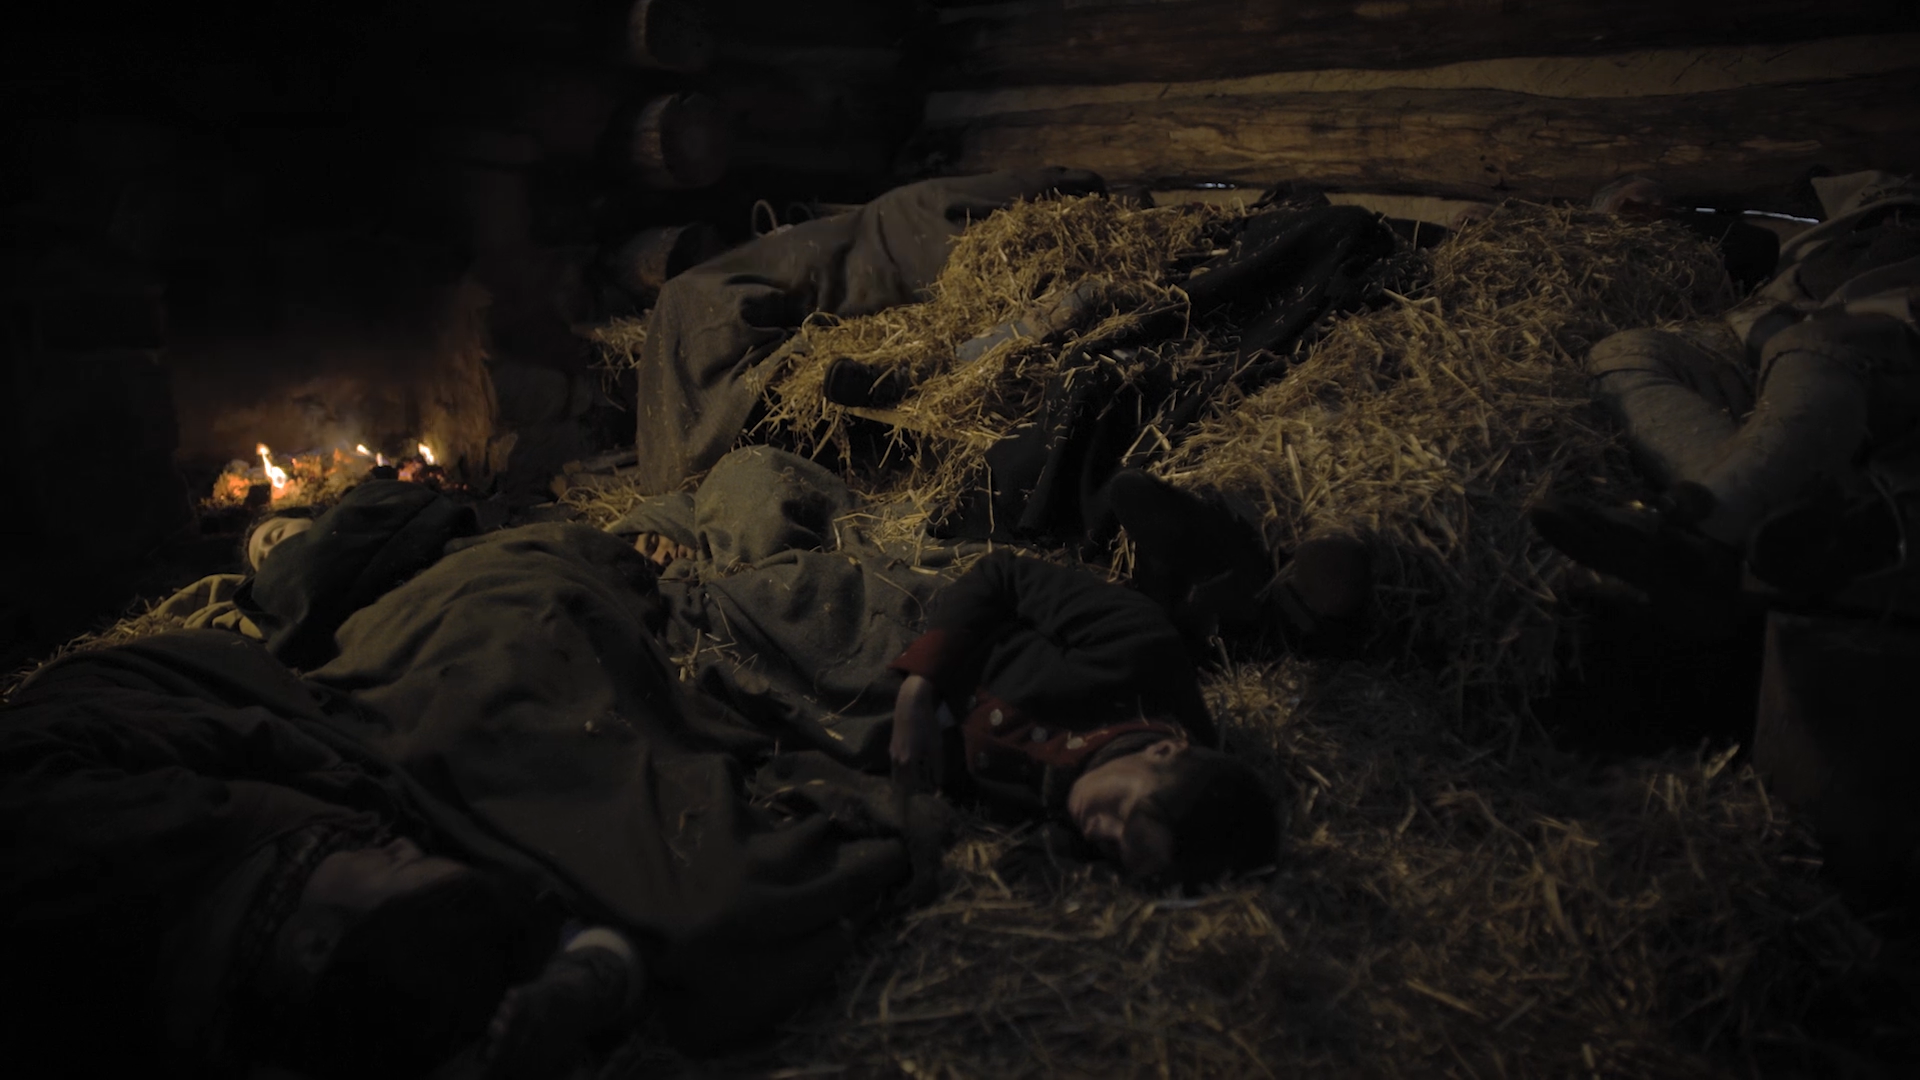 photograph, indoors, fire, hay, soldiers sleeping